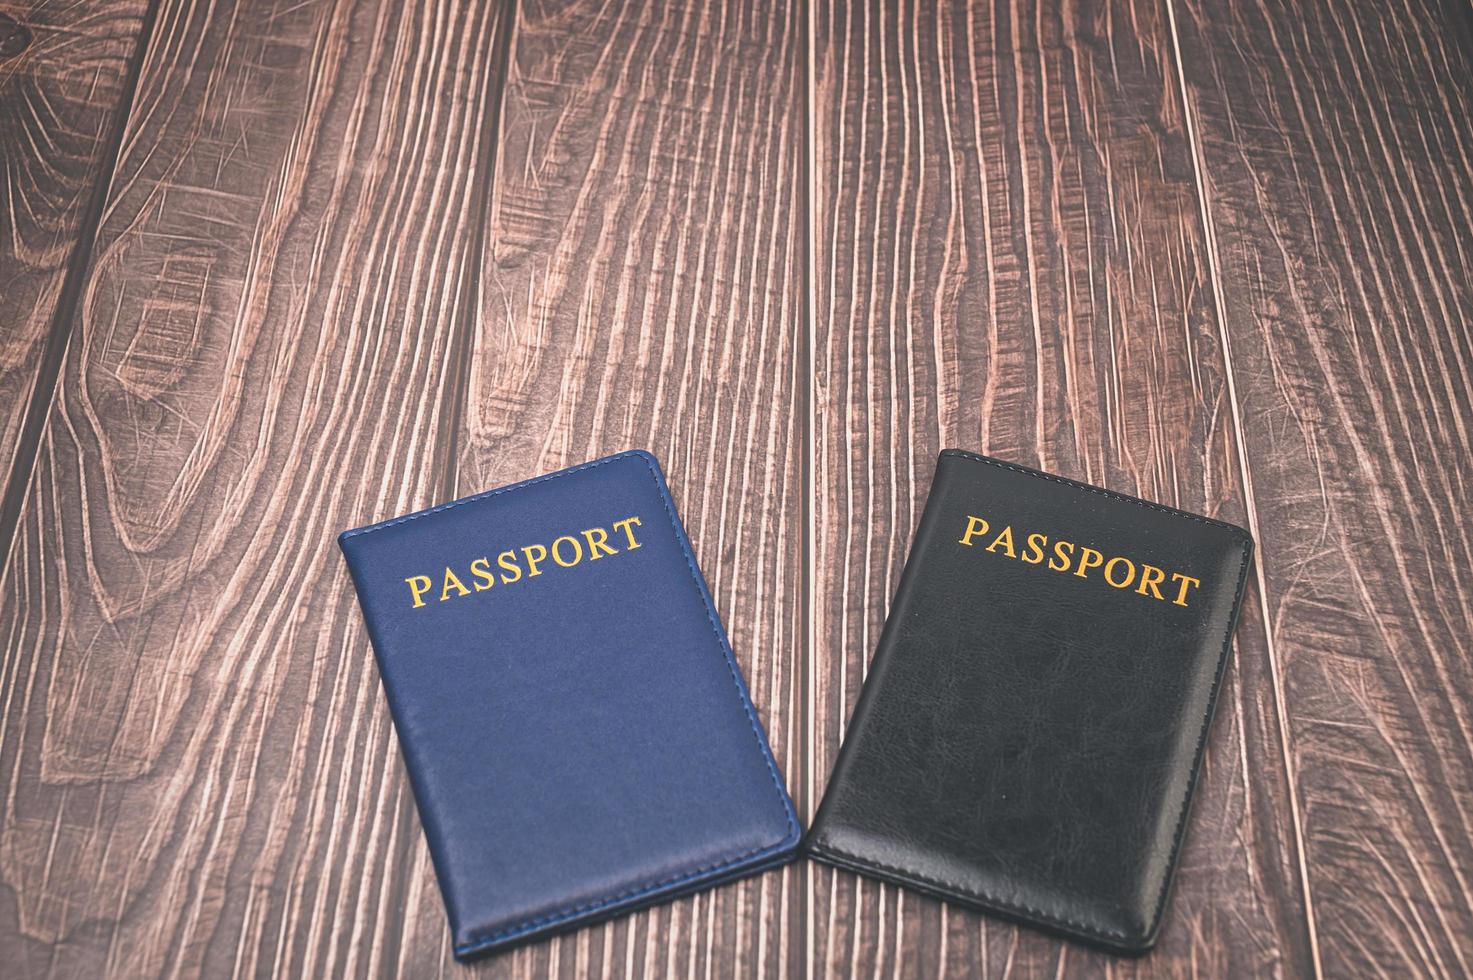 passport Prepare to travel or do business abroad photo